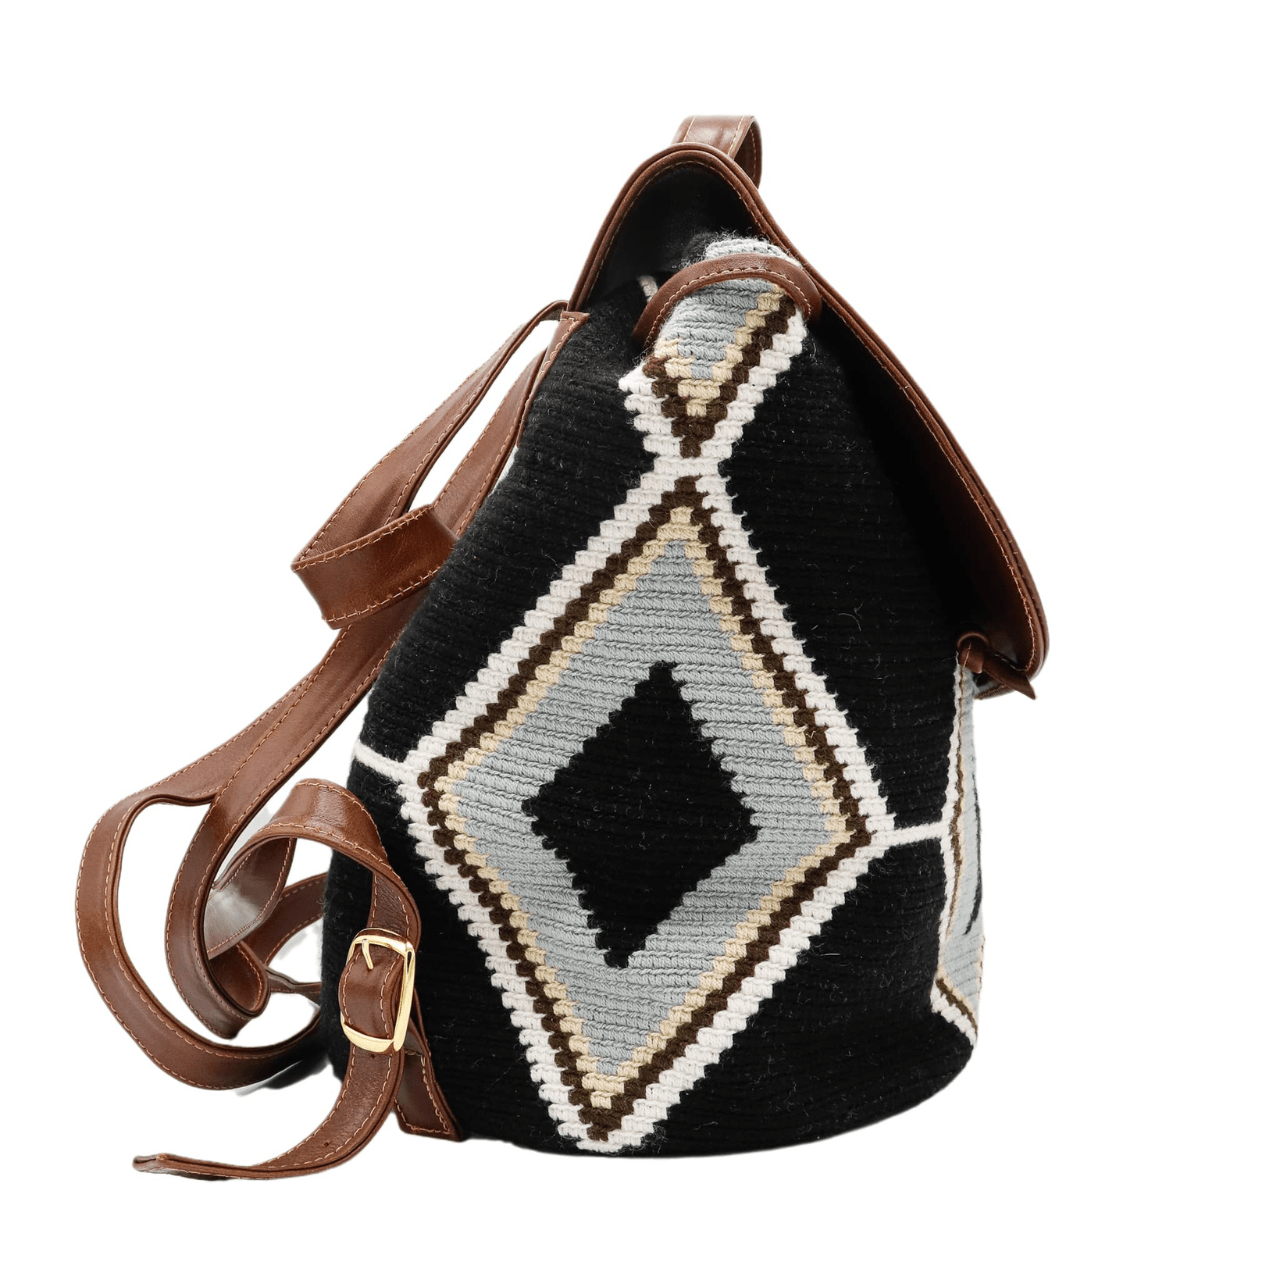 Lex leather backpack featuring a captivating Wayuu pattern body in a sleek combination of solid black, shades of gray, and beige. The backpack is enhanced with genuine leather accents and includes a practical inside pocket. Despite its lightweight design, this backpack boasts exceptional strength and durability.